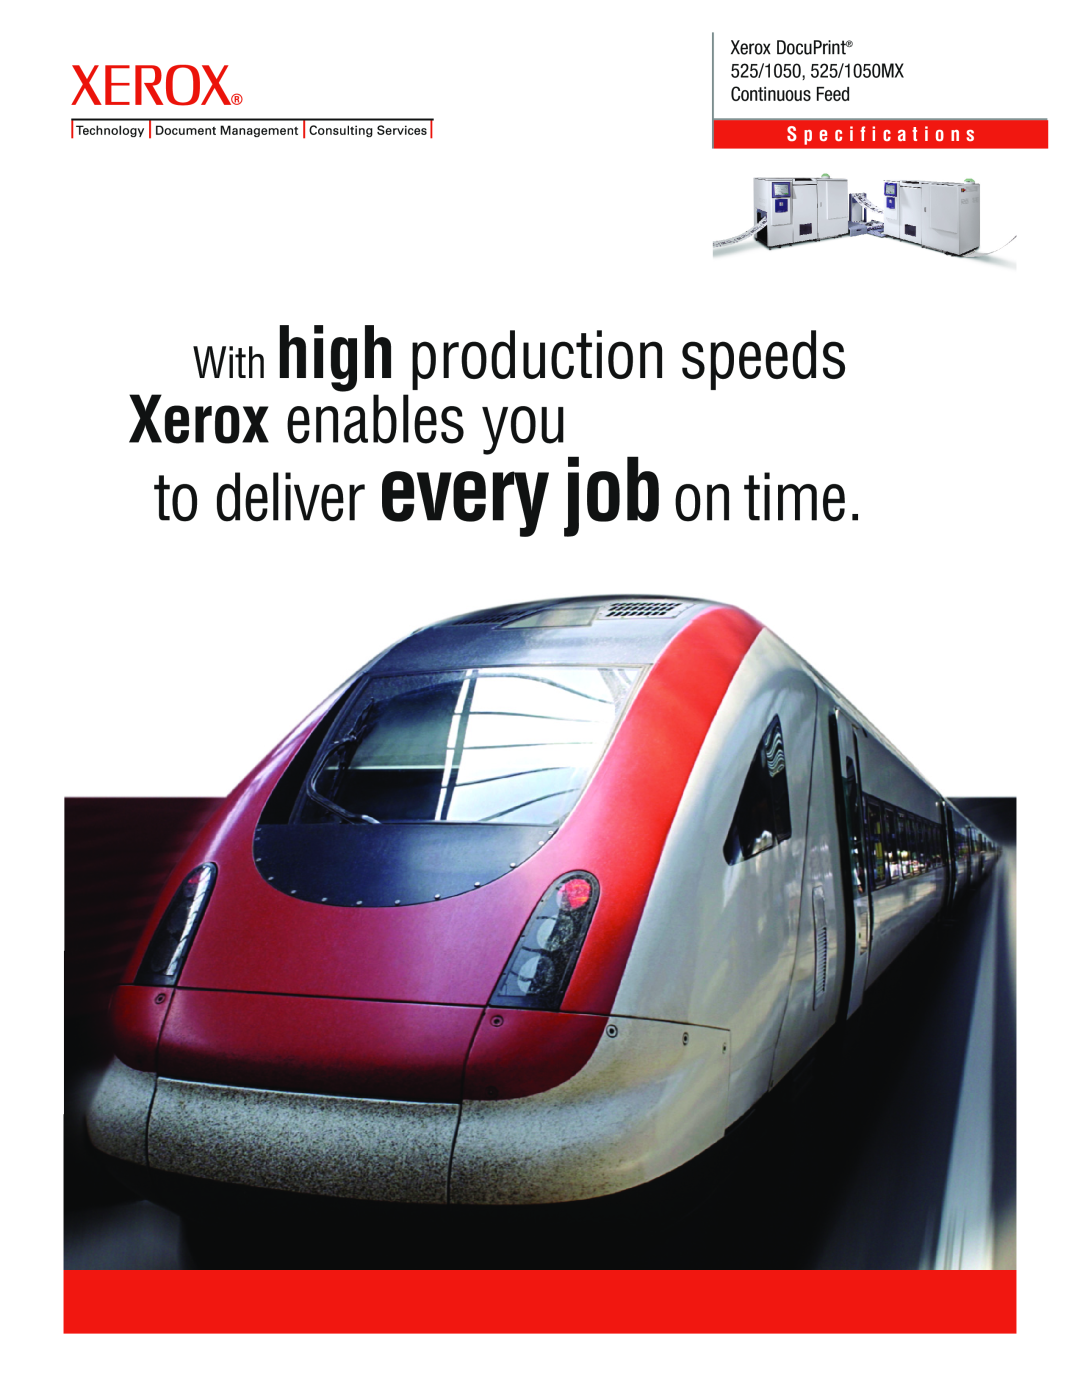 Xerox 525/1050MX specifications S p e c i f i c a t i o n s, to deliver every job on time 